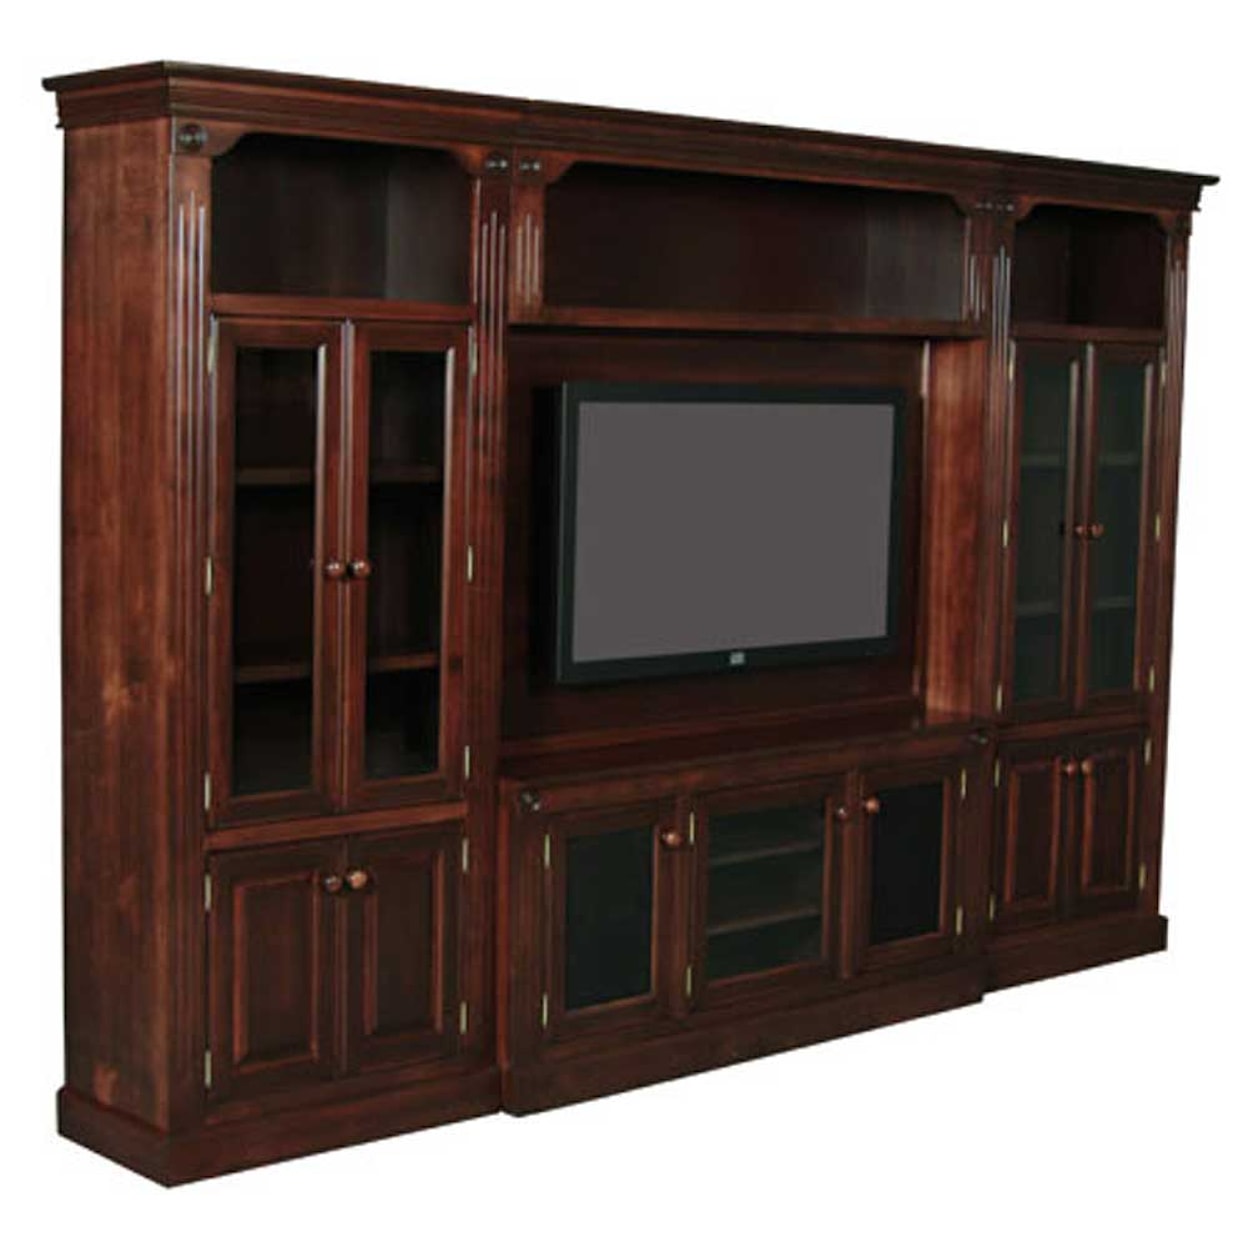 Simply Amish Imperial Amish Entertainment Wall Unit